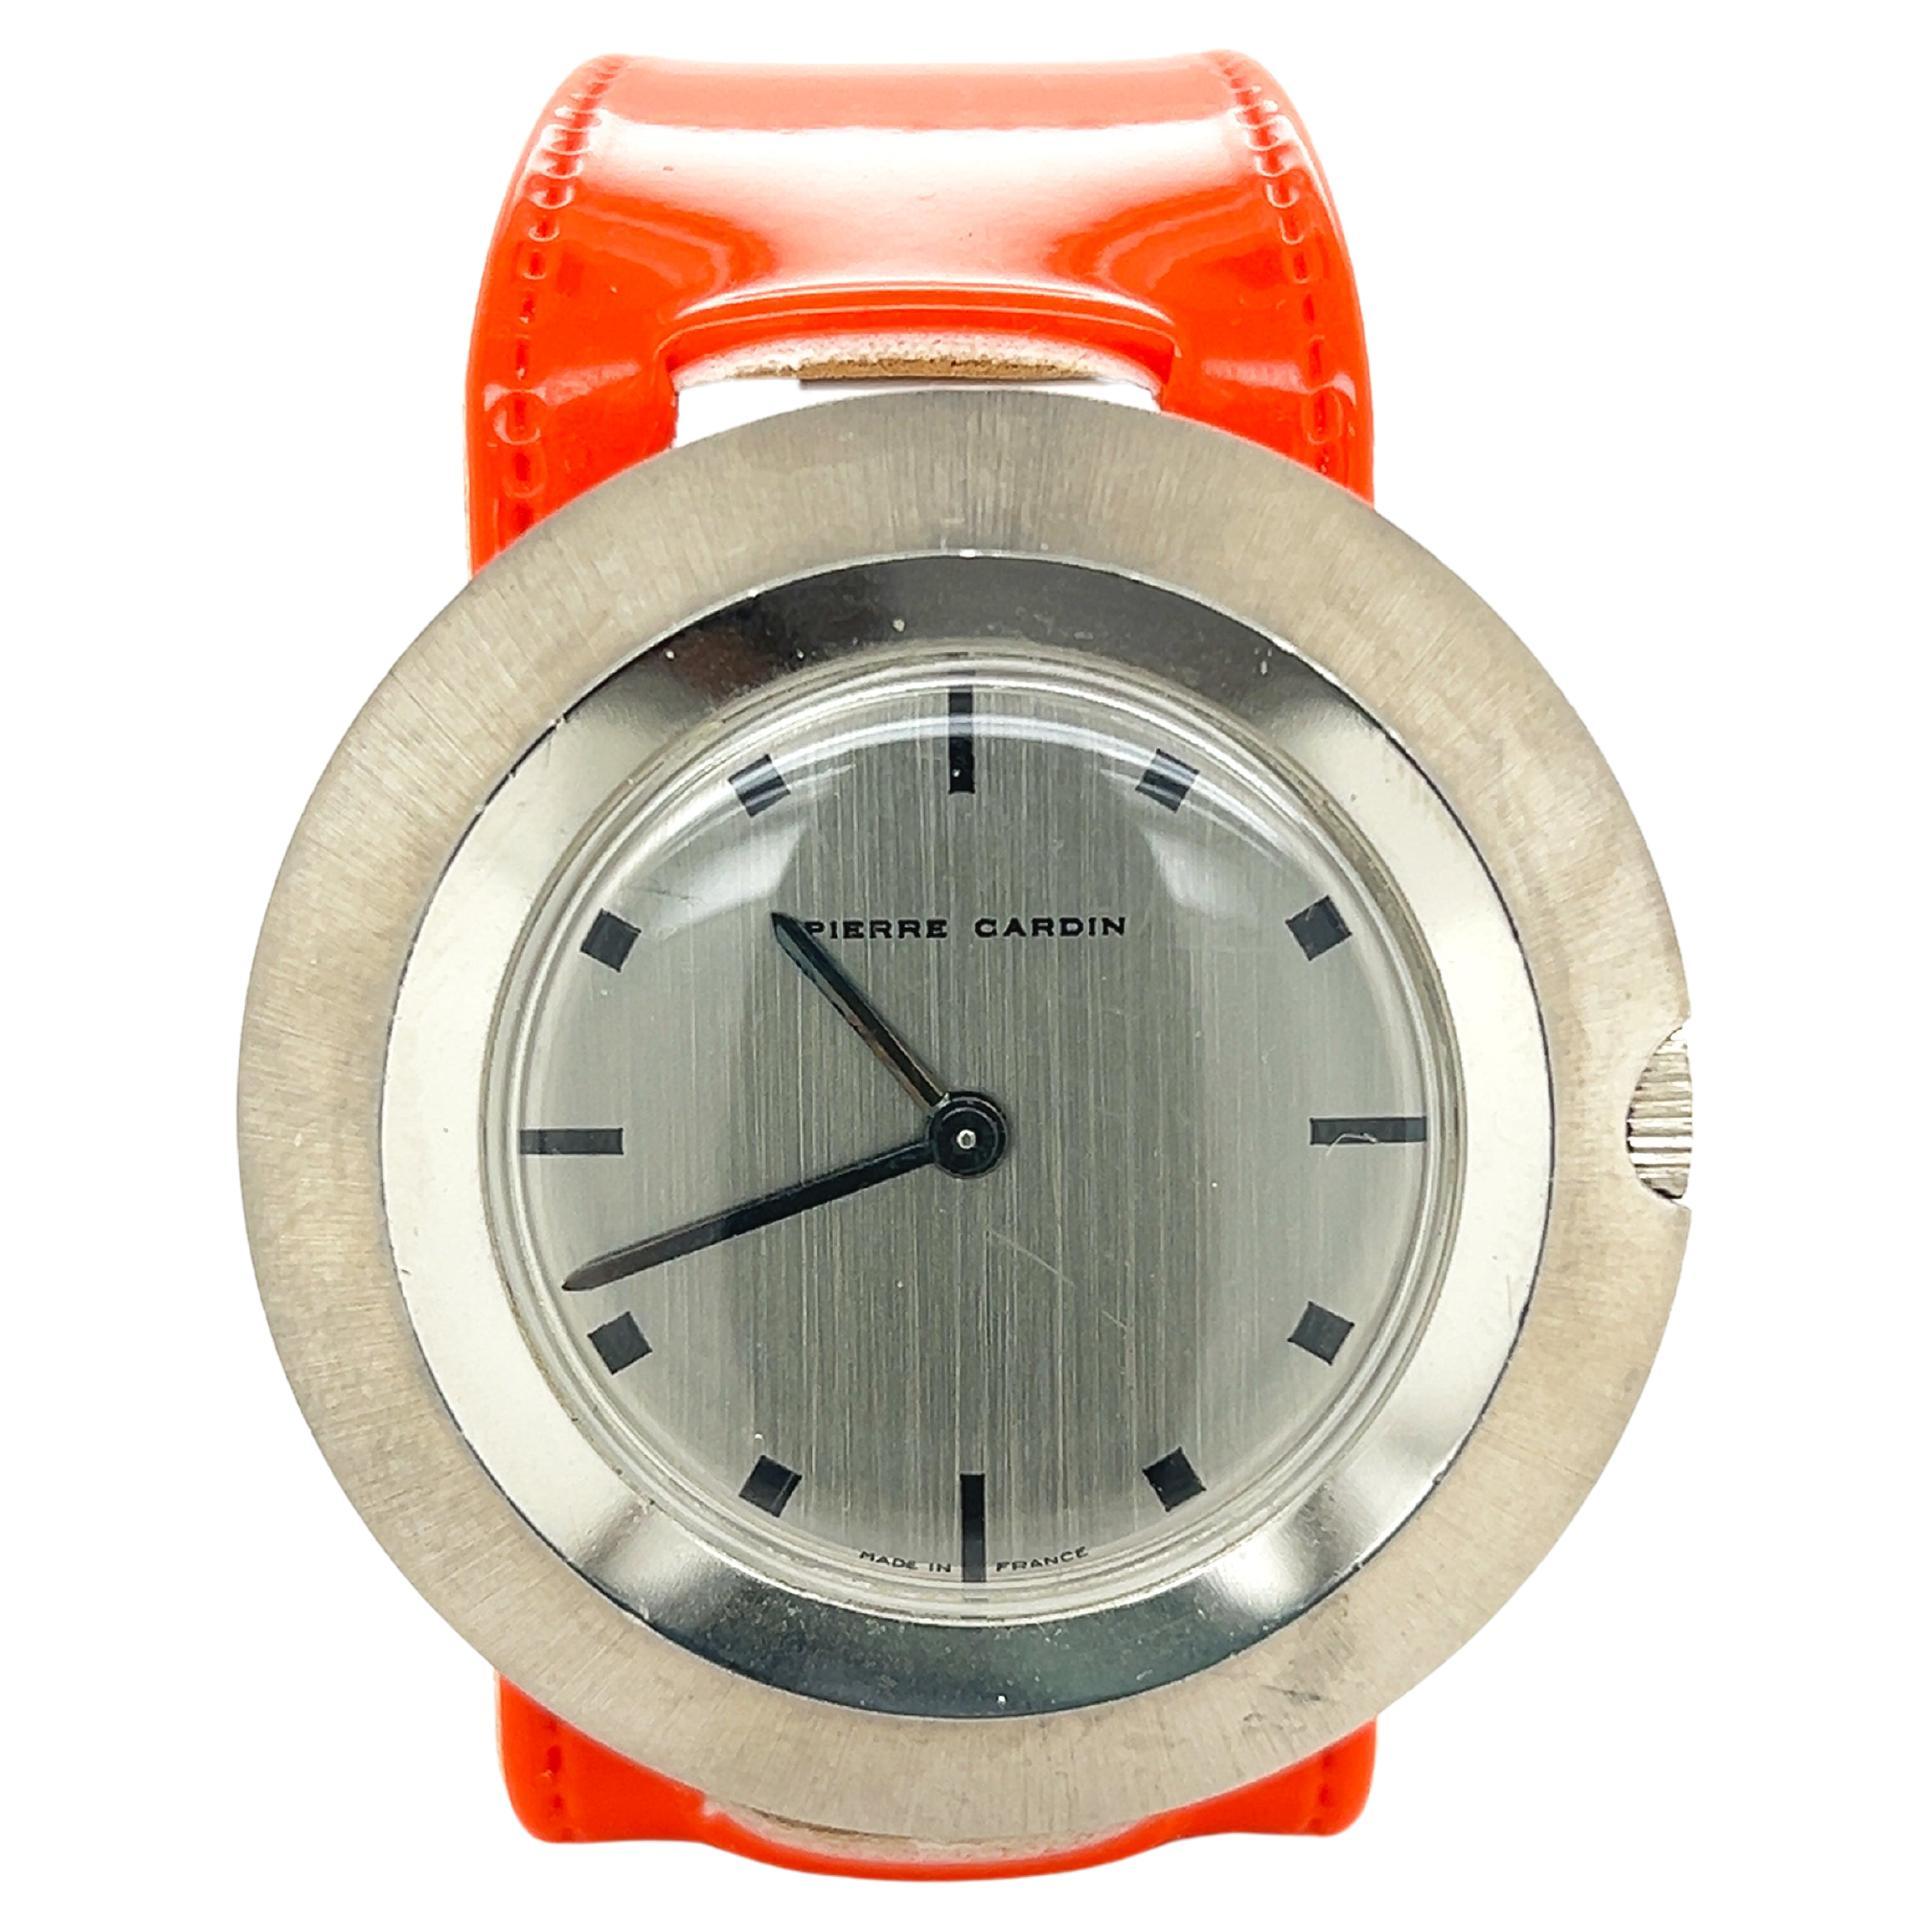 Original 1971 Espace Jaeger-LeCoultre for Pierre Cardin Manual Winding Watch For Sale